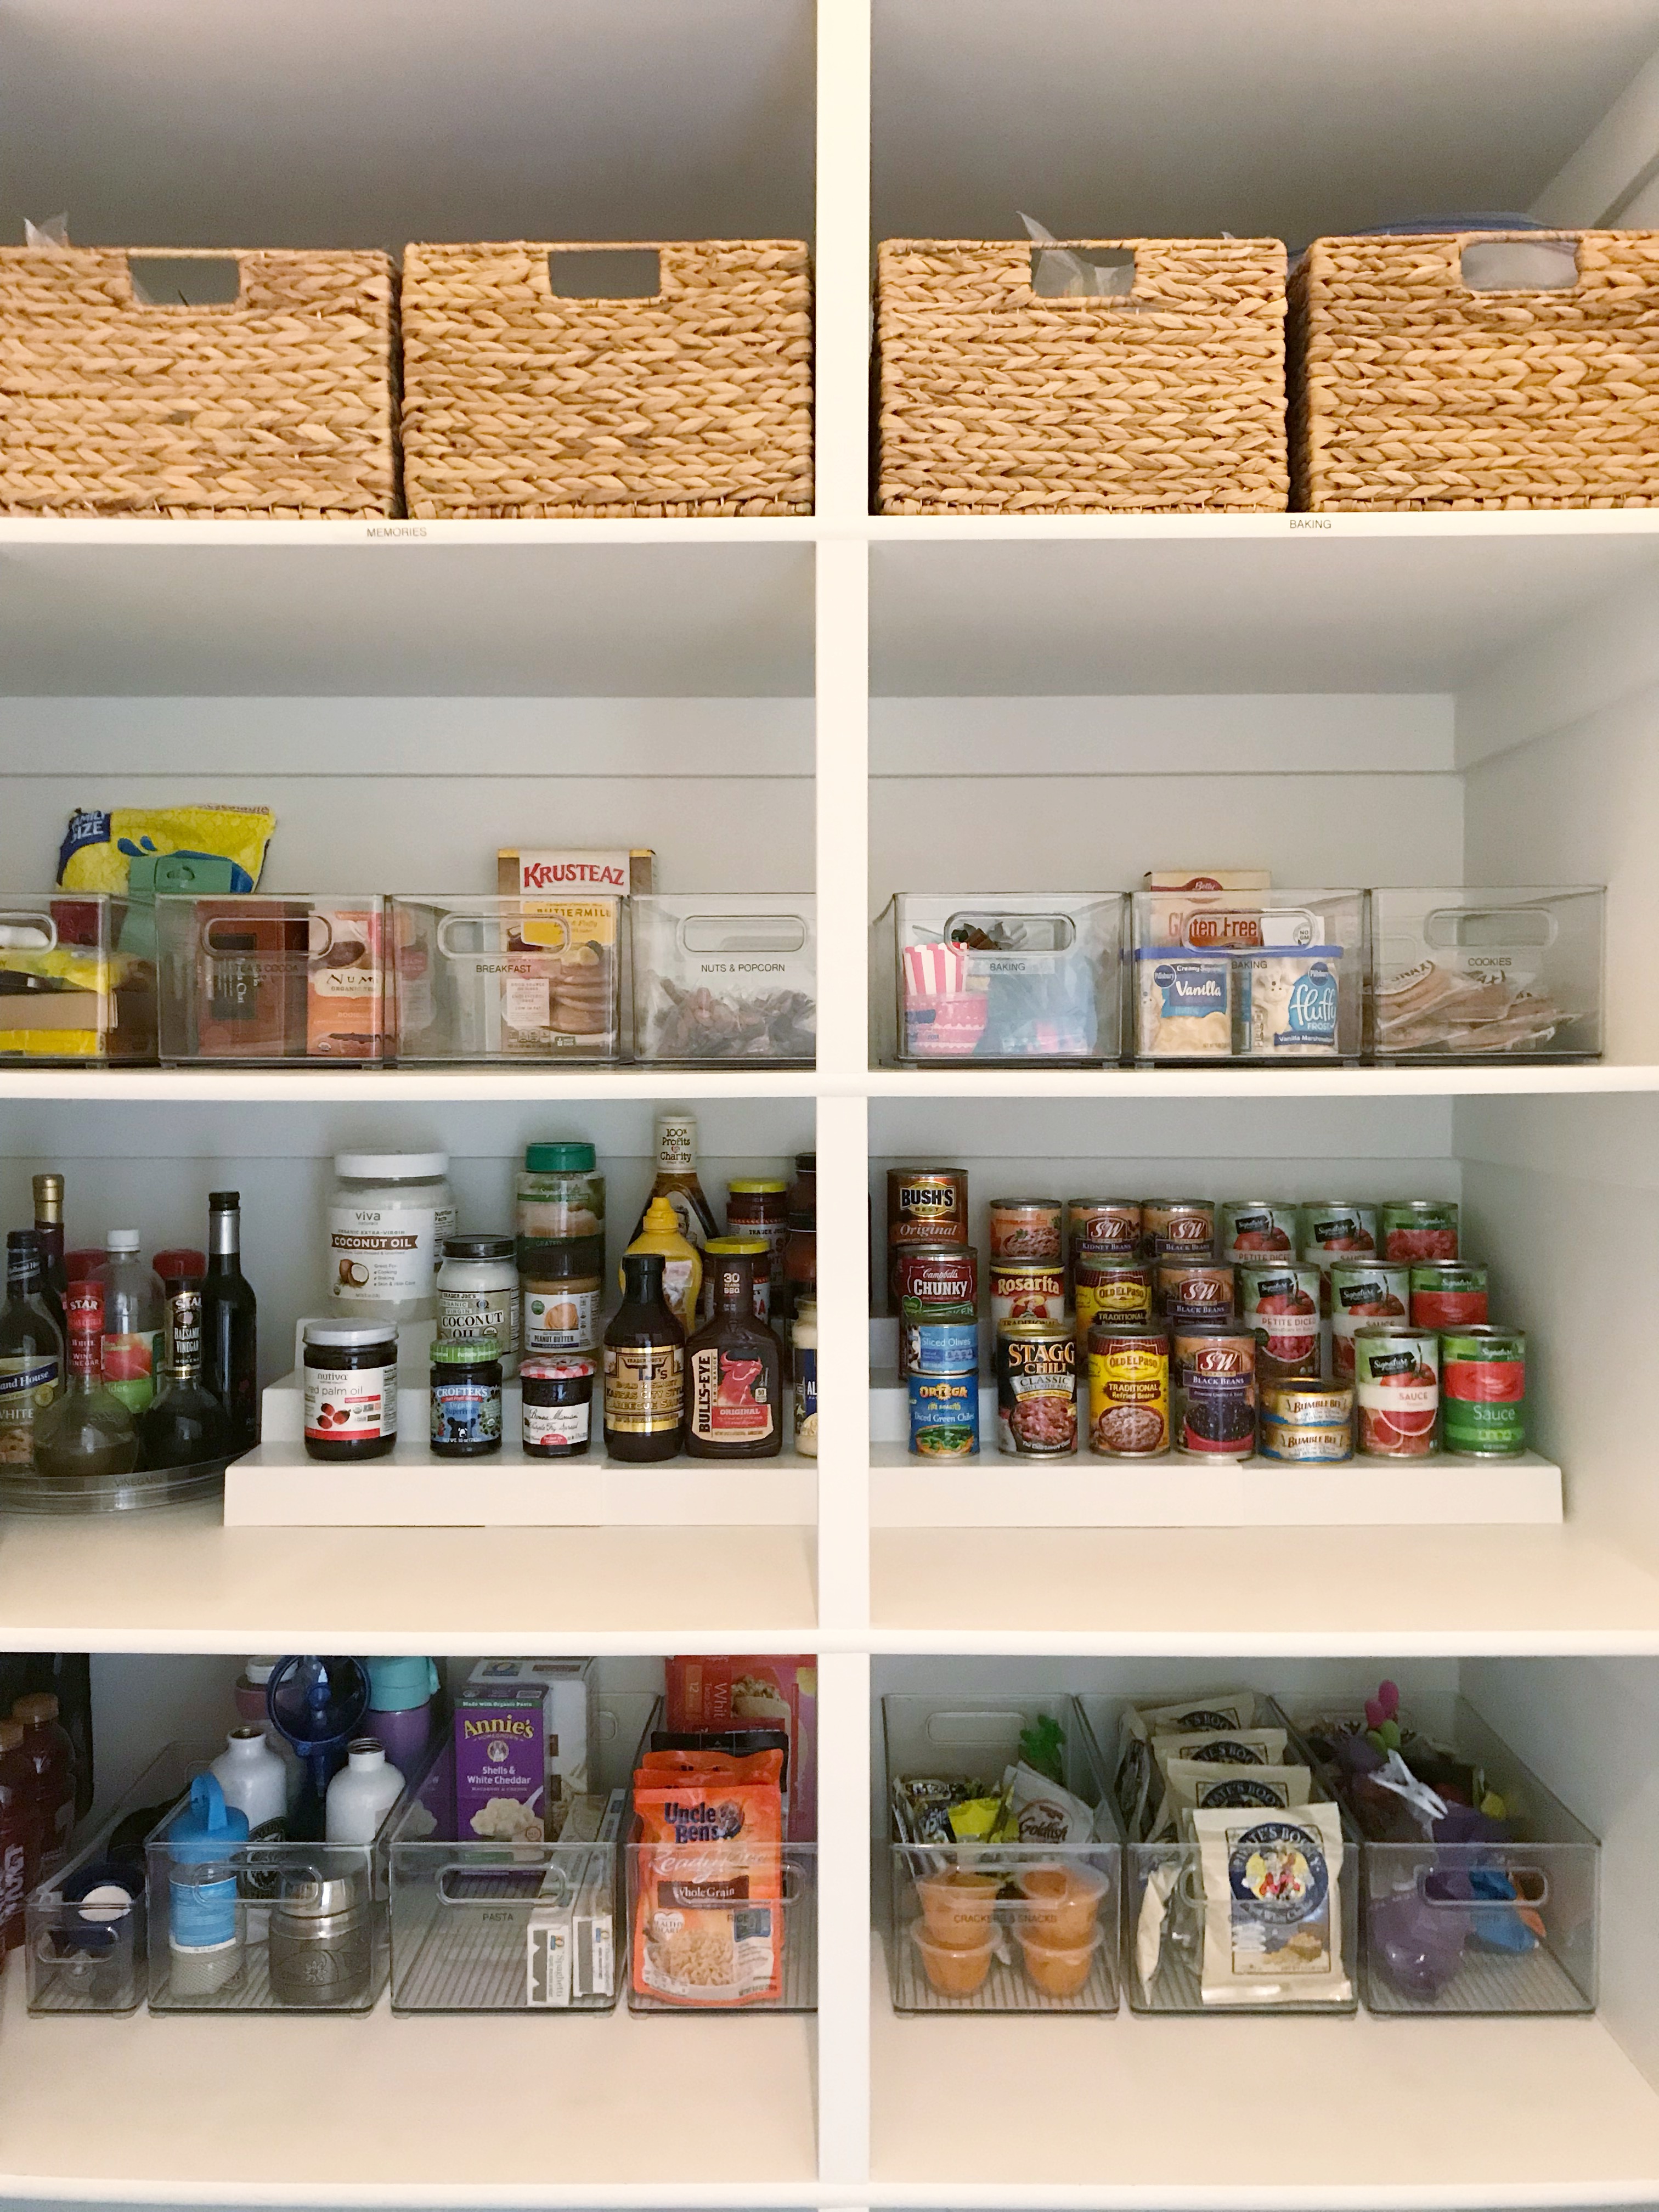 https://simplyorganized.me/wp-content/uploads/2018/04/Organized-Pantry-Shelves-with-Baskets.jpg